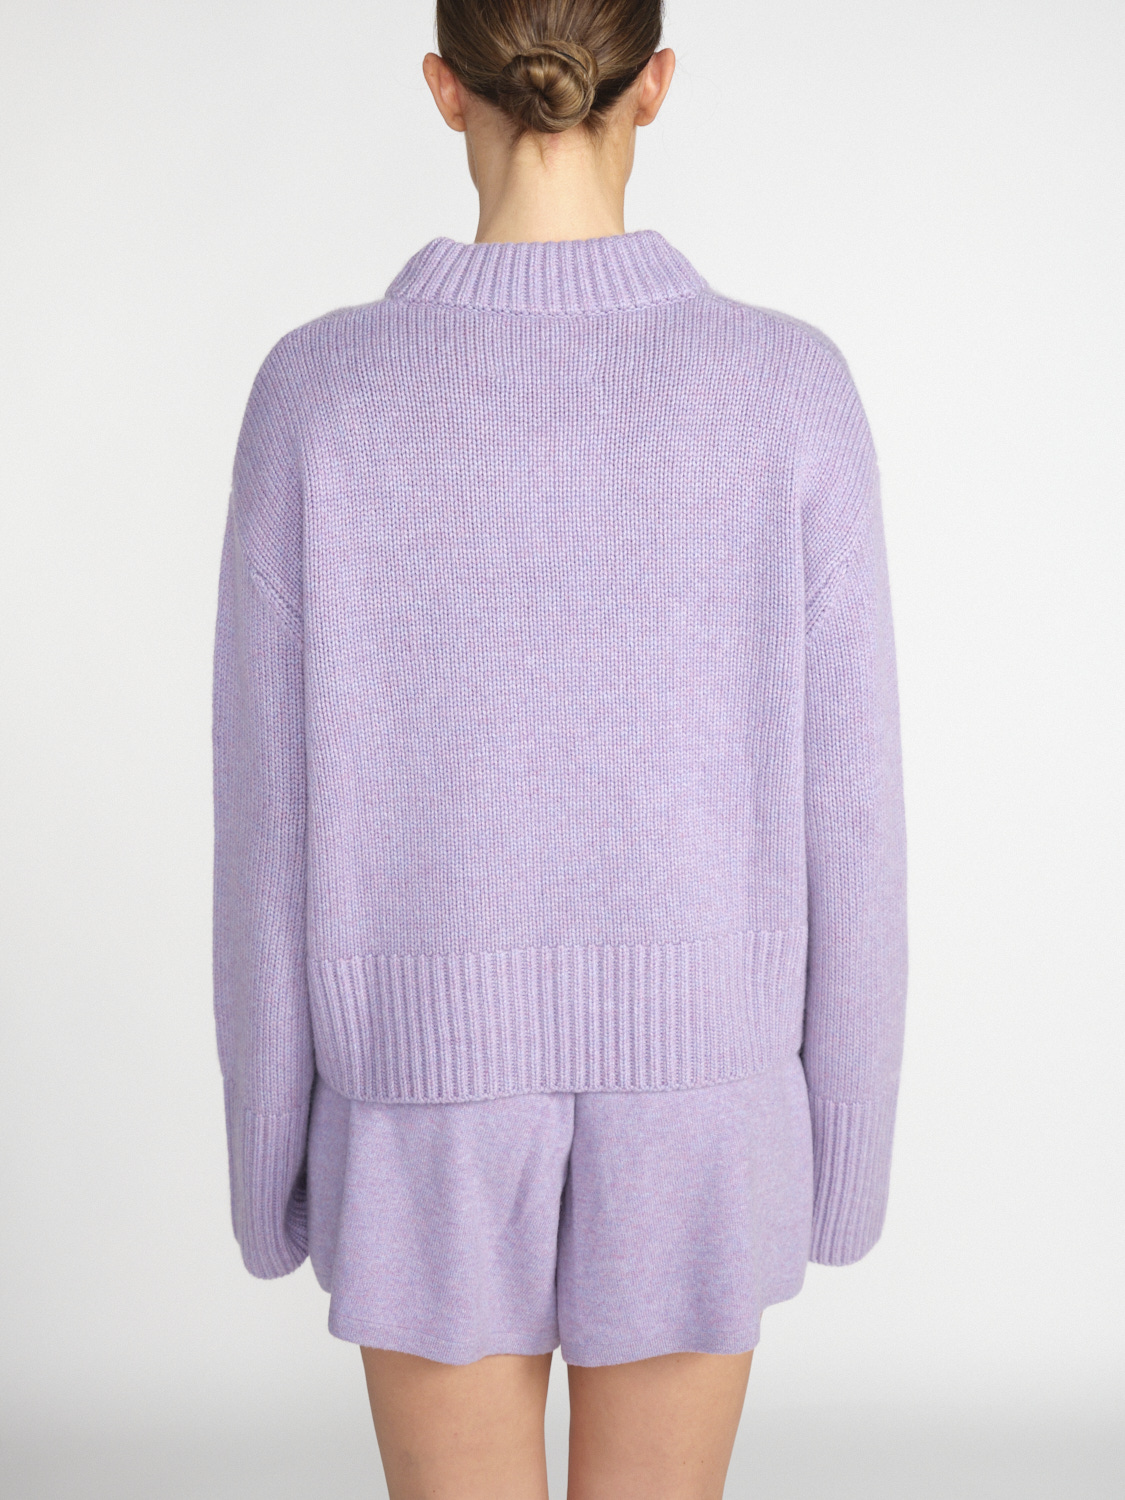 Lisa Yang Sony – Kurzer Cashmere Pullover   lila One Size